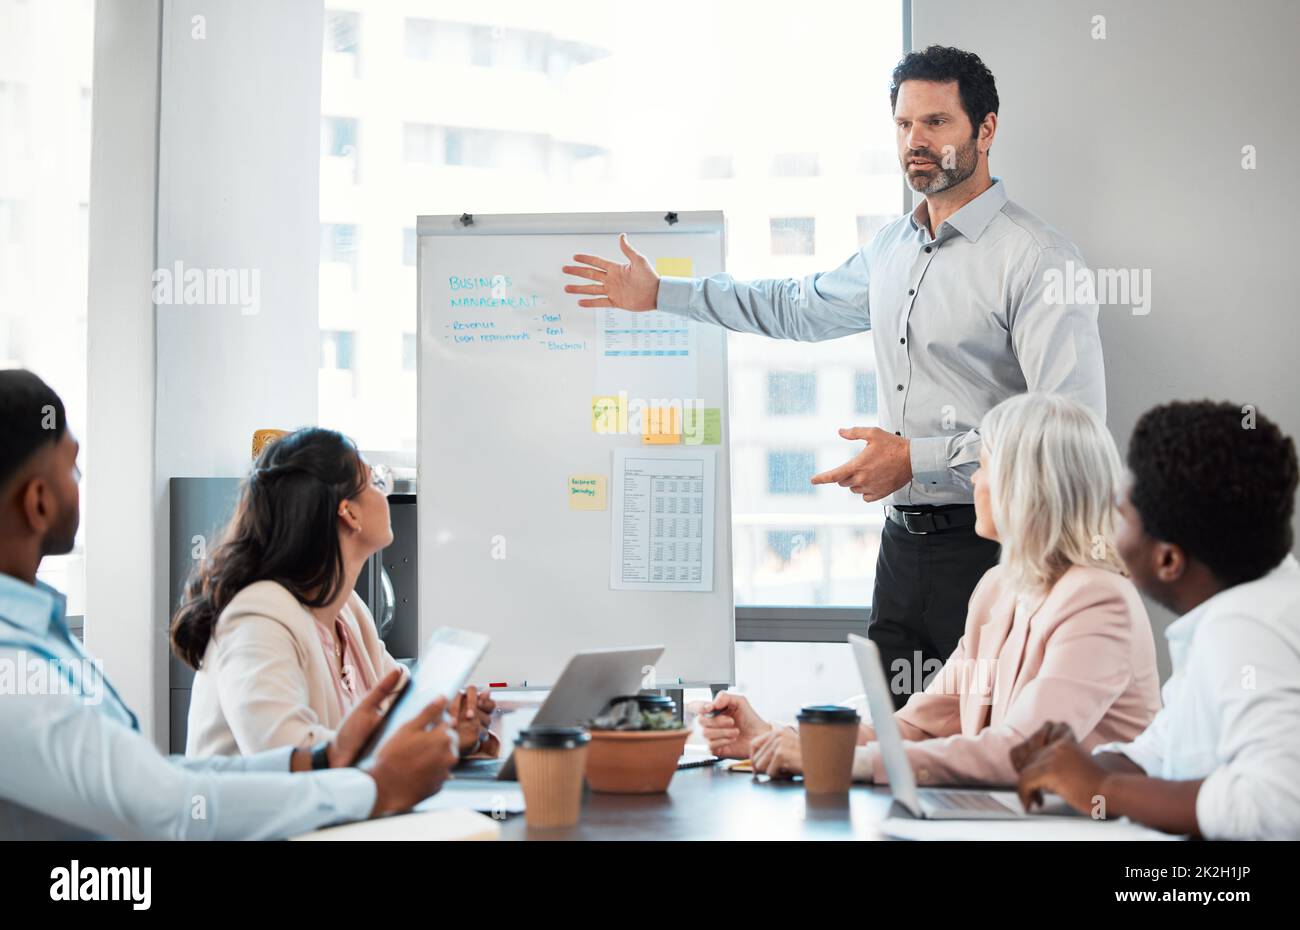 You can always be better than yesterday. Shot of a handsome mature businessman standing and hosting a presentation during a meeting with his colleagues in the office. Stock Photo